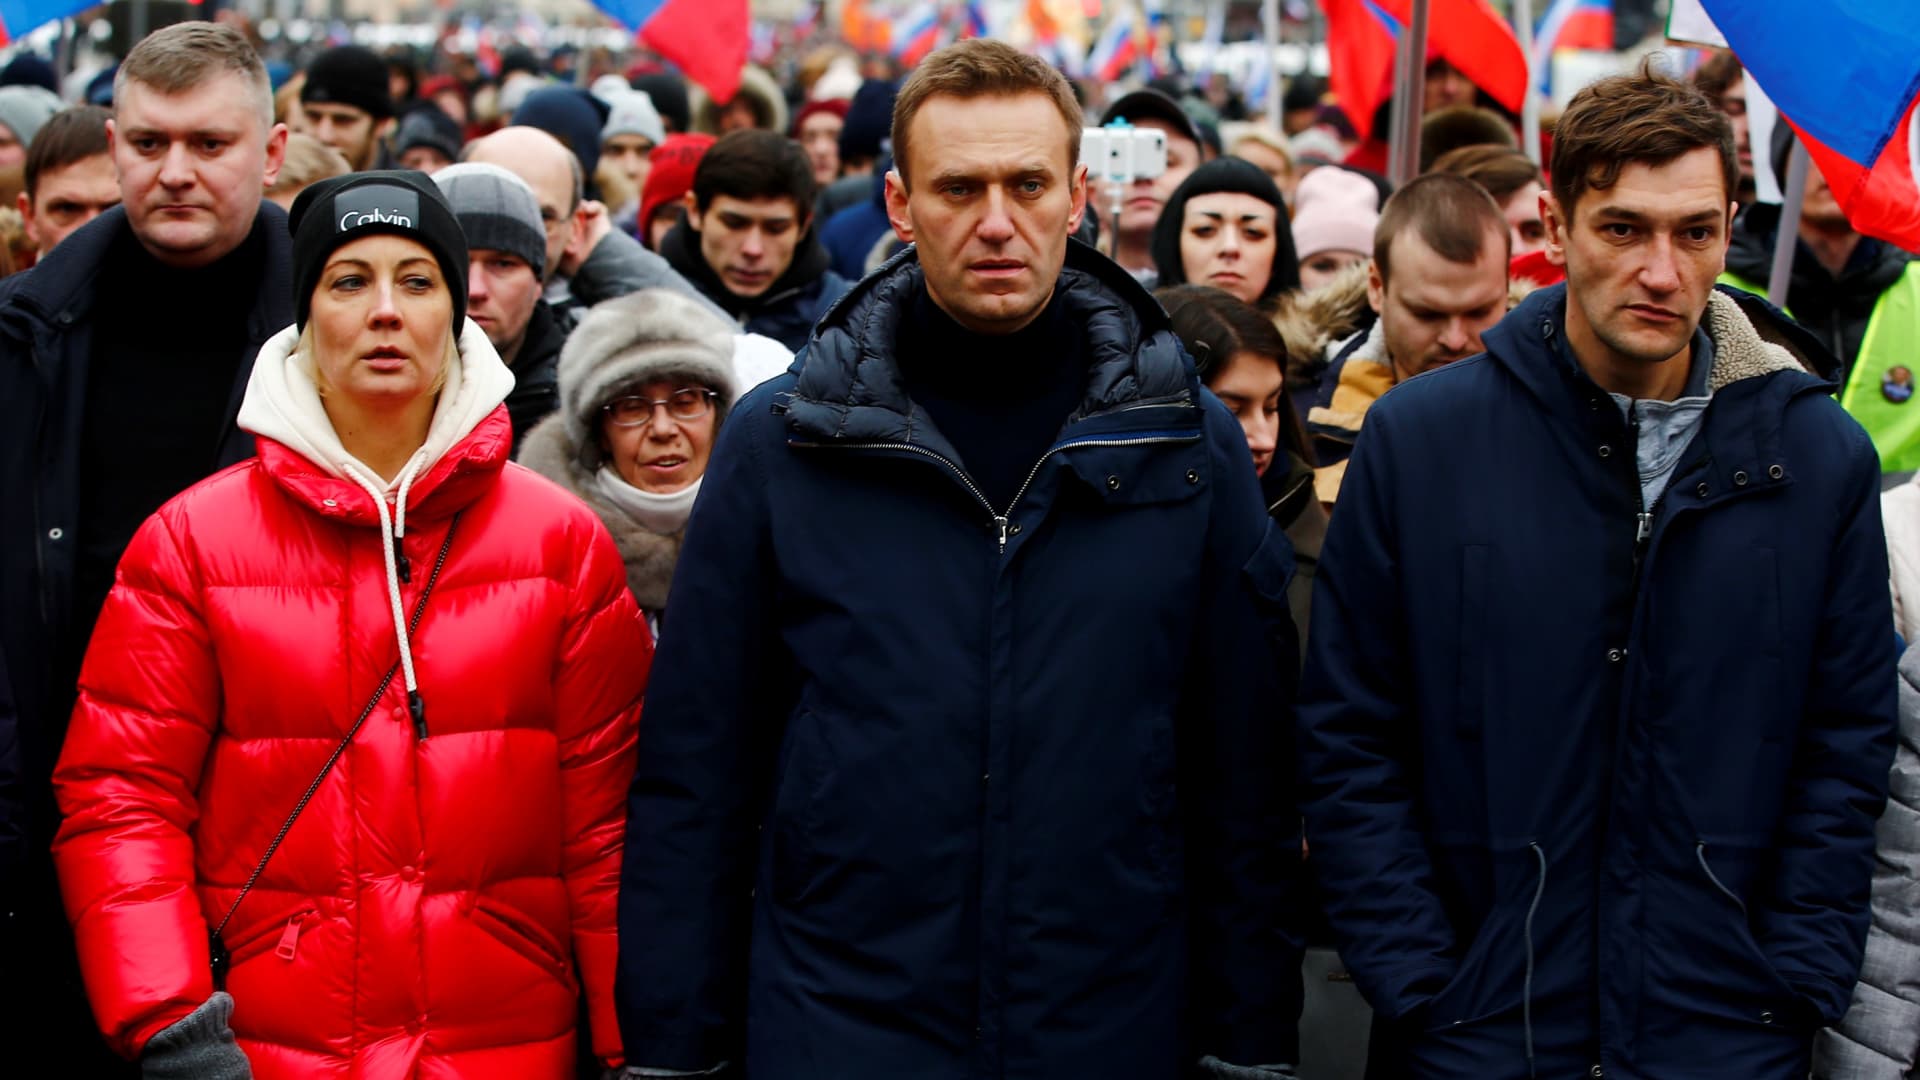 Russian opposition leader Alexei Navalny, his wife Yulia and brother Oleg take part in a march at Strastnoy Boulevard in memory of Russian politician and opposition leader Boris Nemtsov on his 4th death anniversary in Moscow, Russia on February 24, 2019.